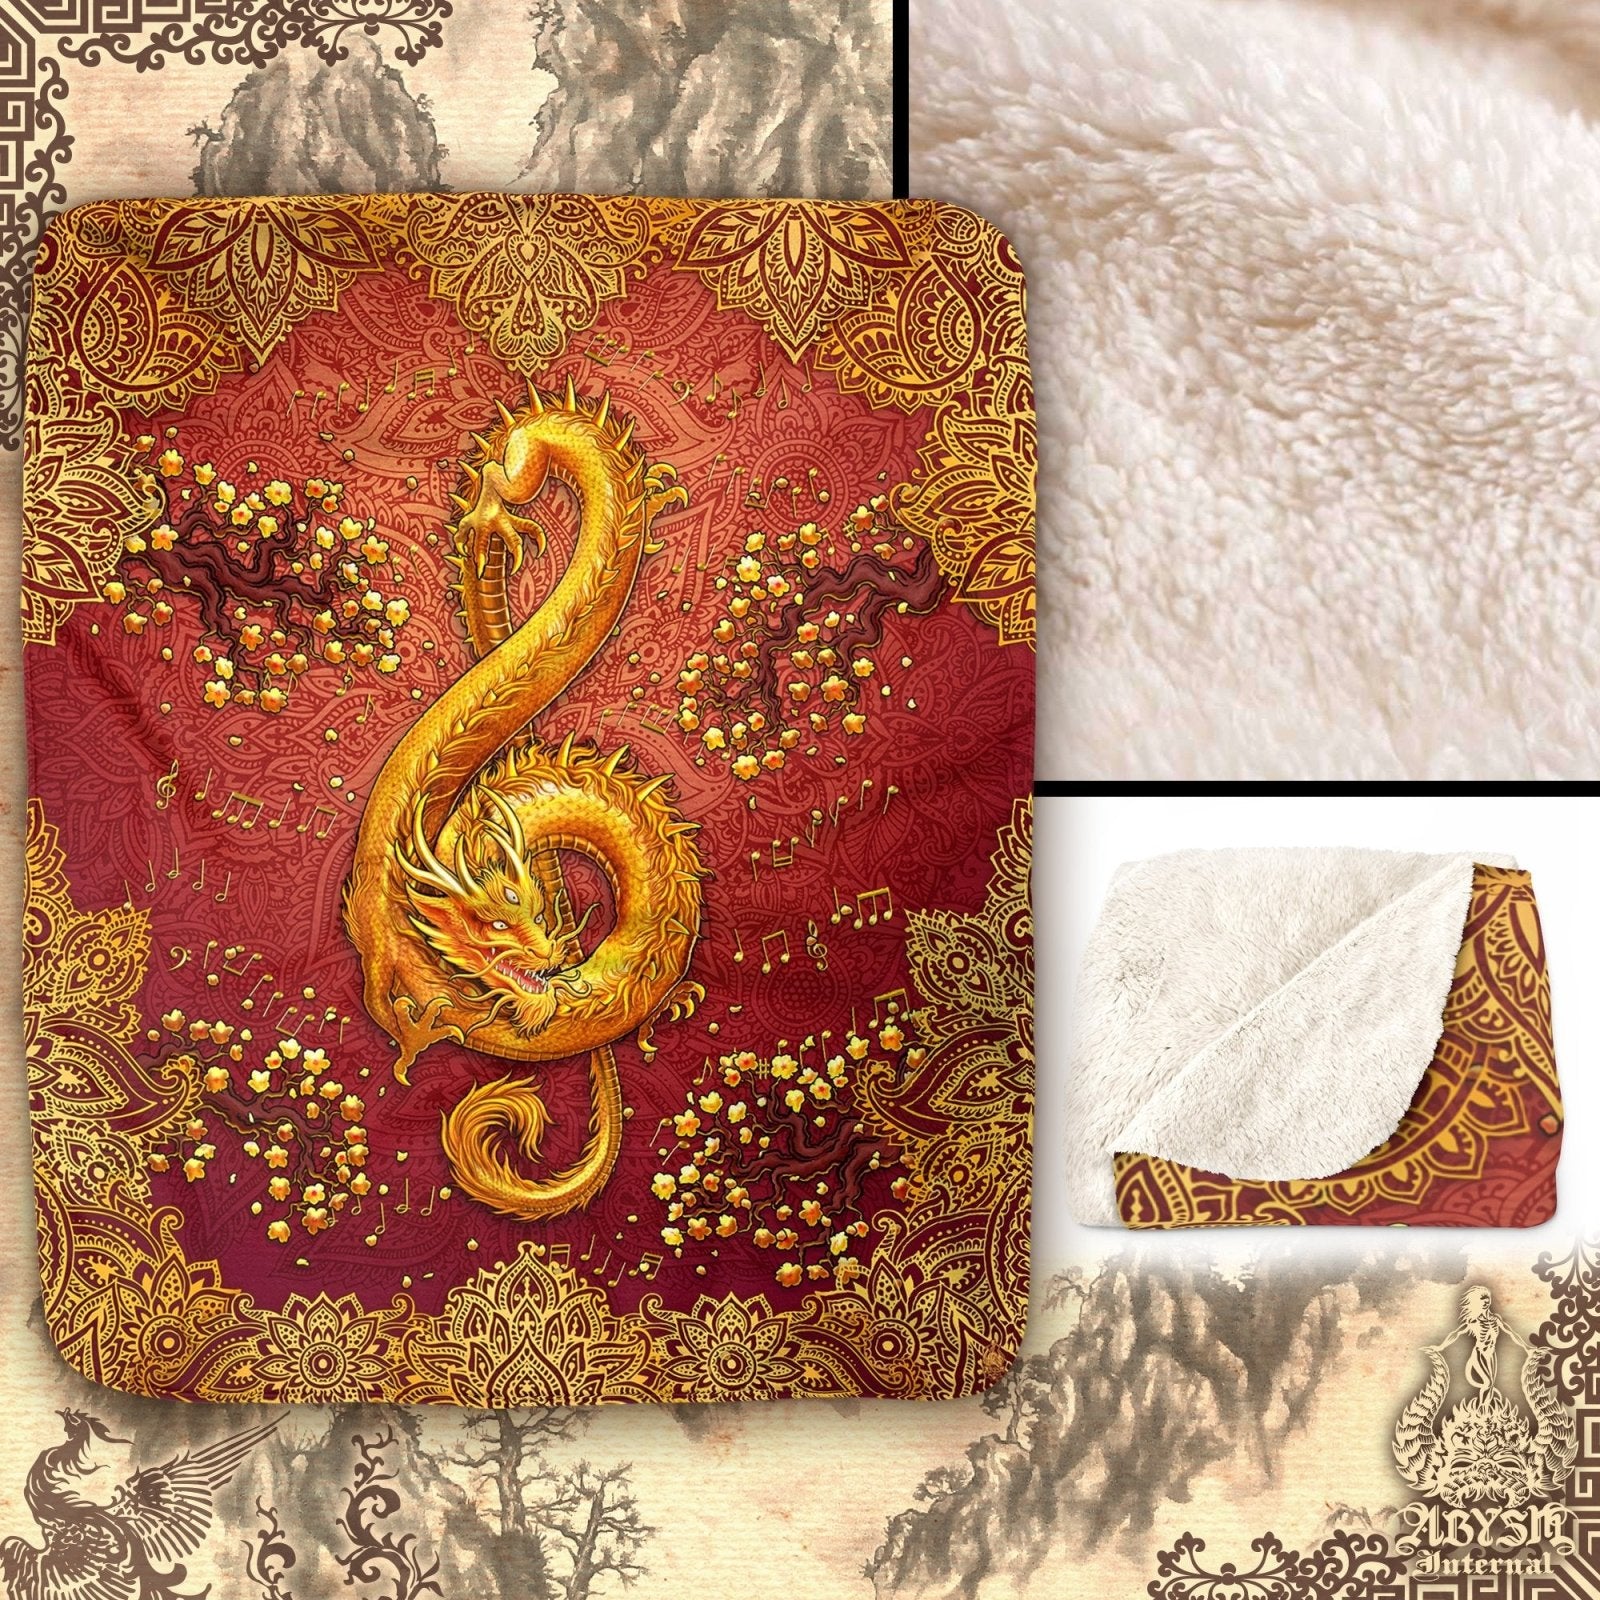 Boho Throw Fleece Blanket, Treble Clef, Music Art, Hippie and Indie Decor, Eclectic and Funky Gift - Gold Dragon, Mandala - Abysm Internal